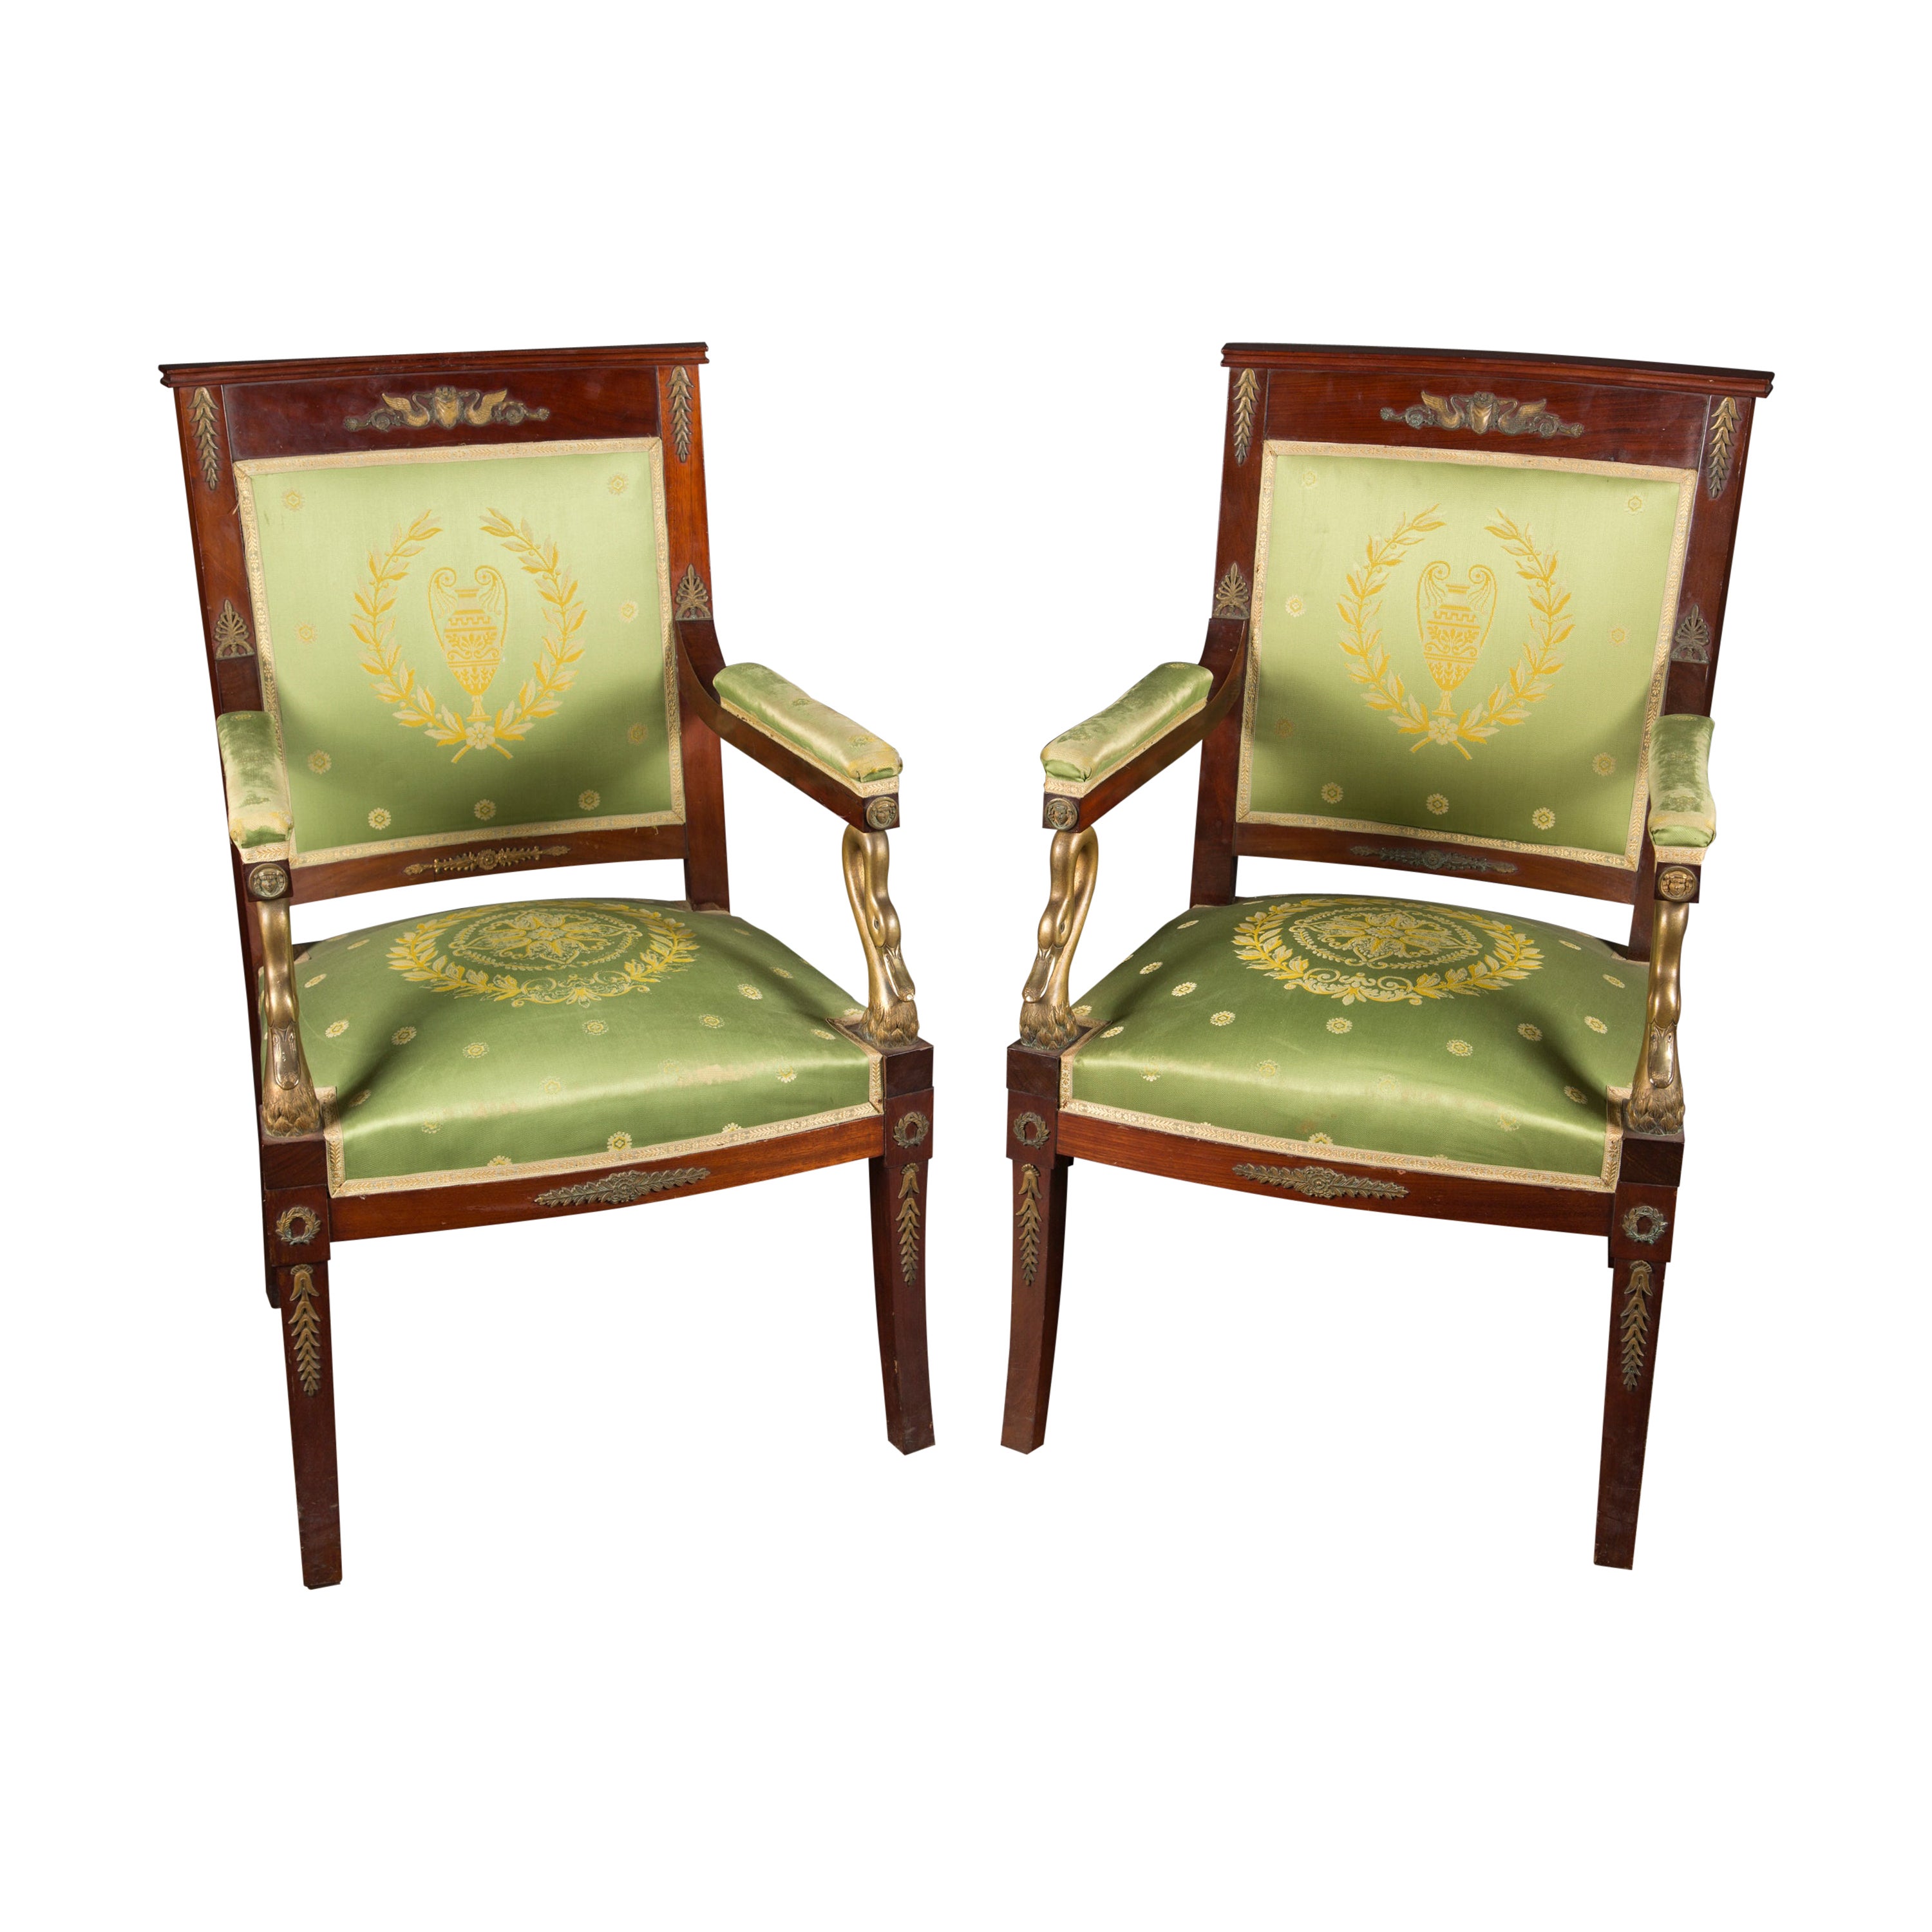 Pair of French Empire Mahogany Armchairs with Bronze Swans, Circa 1870 For Sale